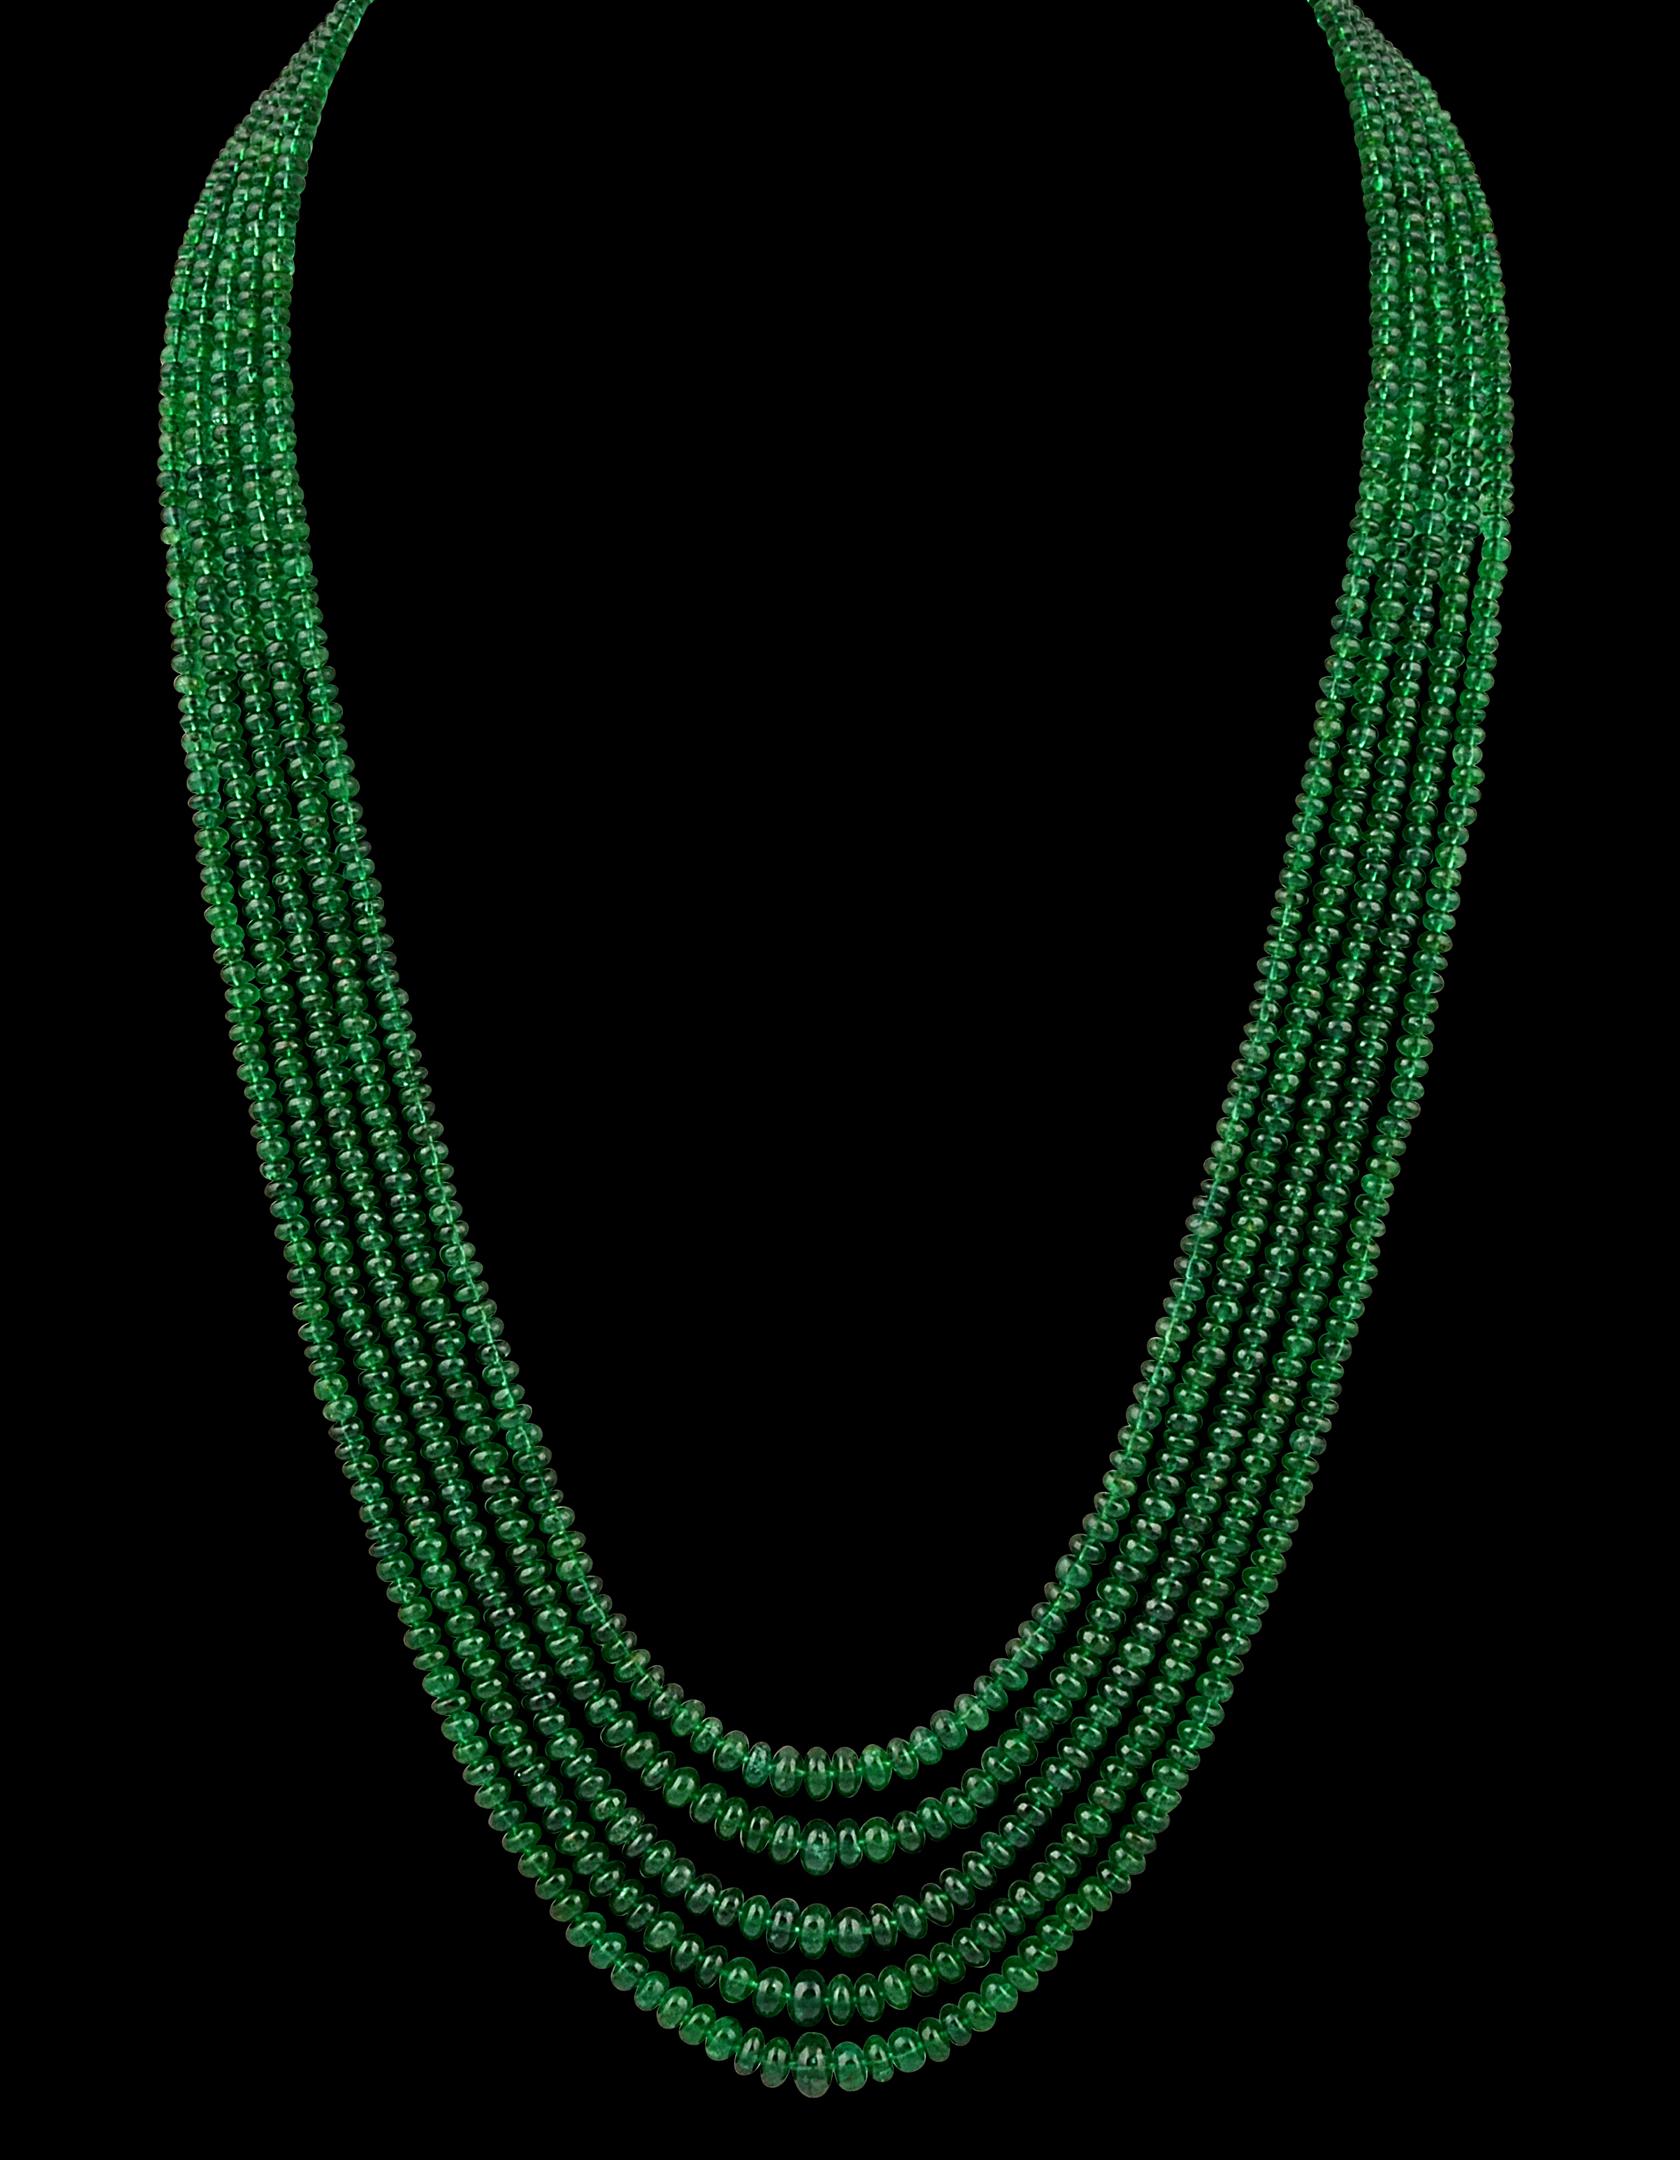 Approximately 300 Carat  very fine Emerald Beads 5 Line Necklace With 14 Karat Yellow Gold Clasp Adjustable with multiple links
This spectacular Necklace   consisting of approximately 200 Ct  of fine beads.
The shine sparkle and brilliance with deep